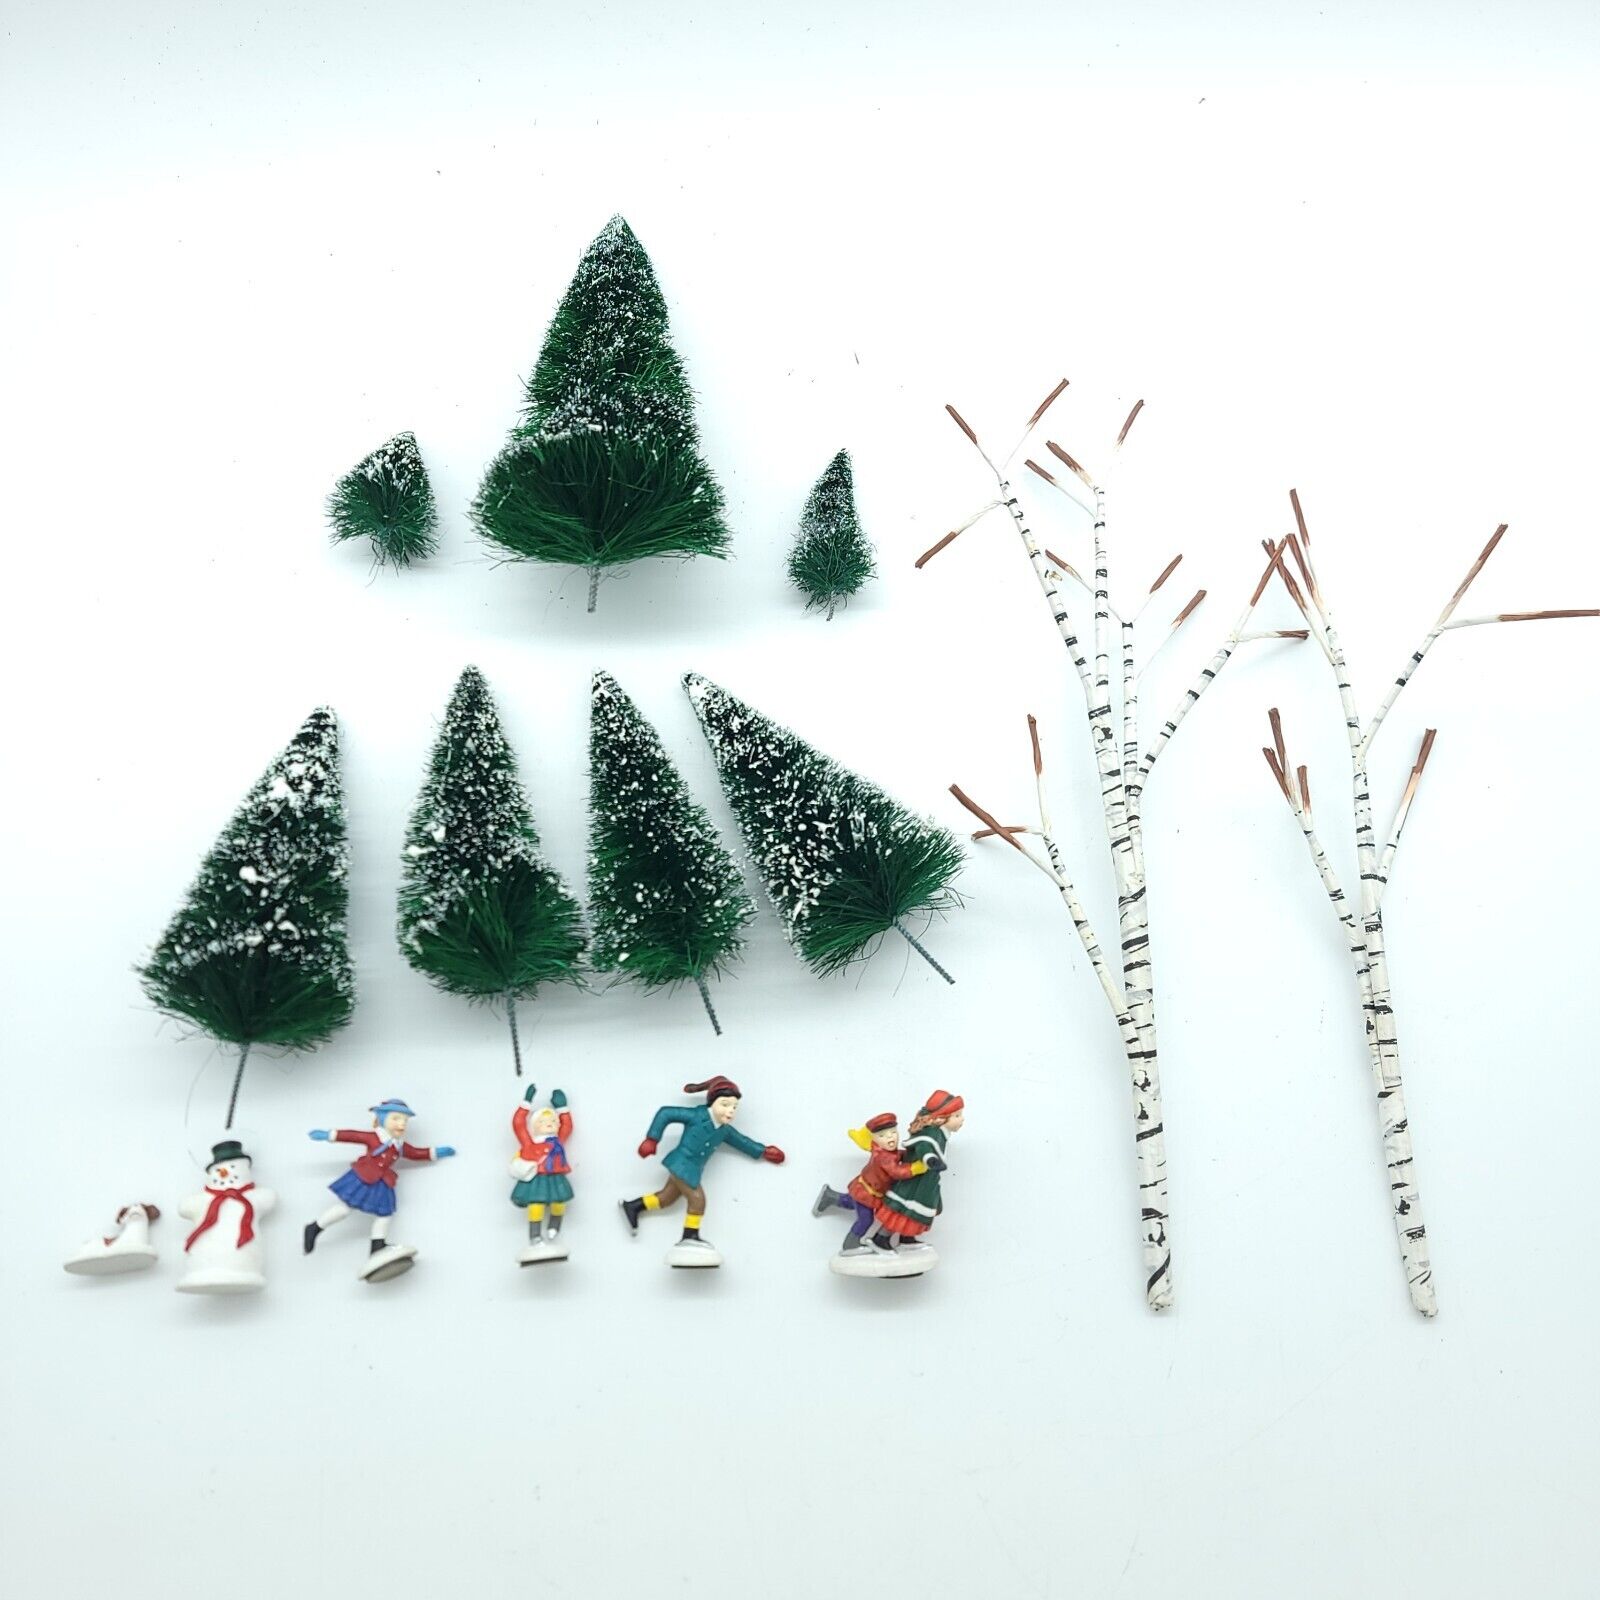 Dept. 56 Christmas Village Animated Skating Pond Replacement Skaters Plus trees